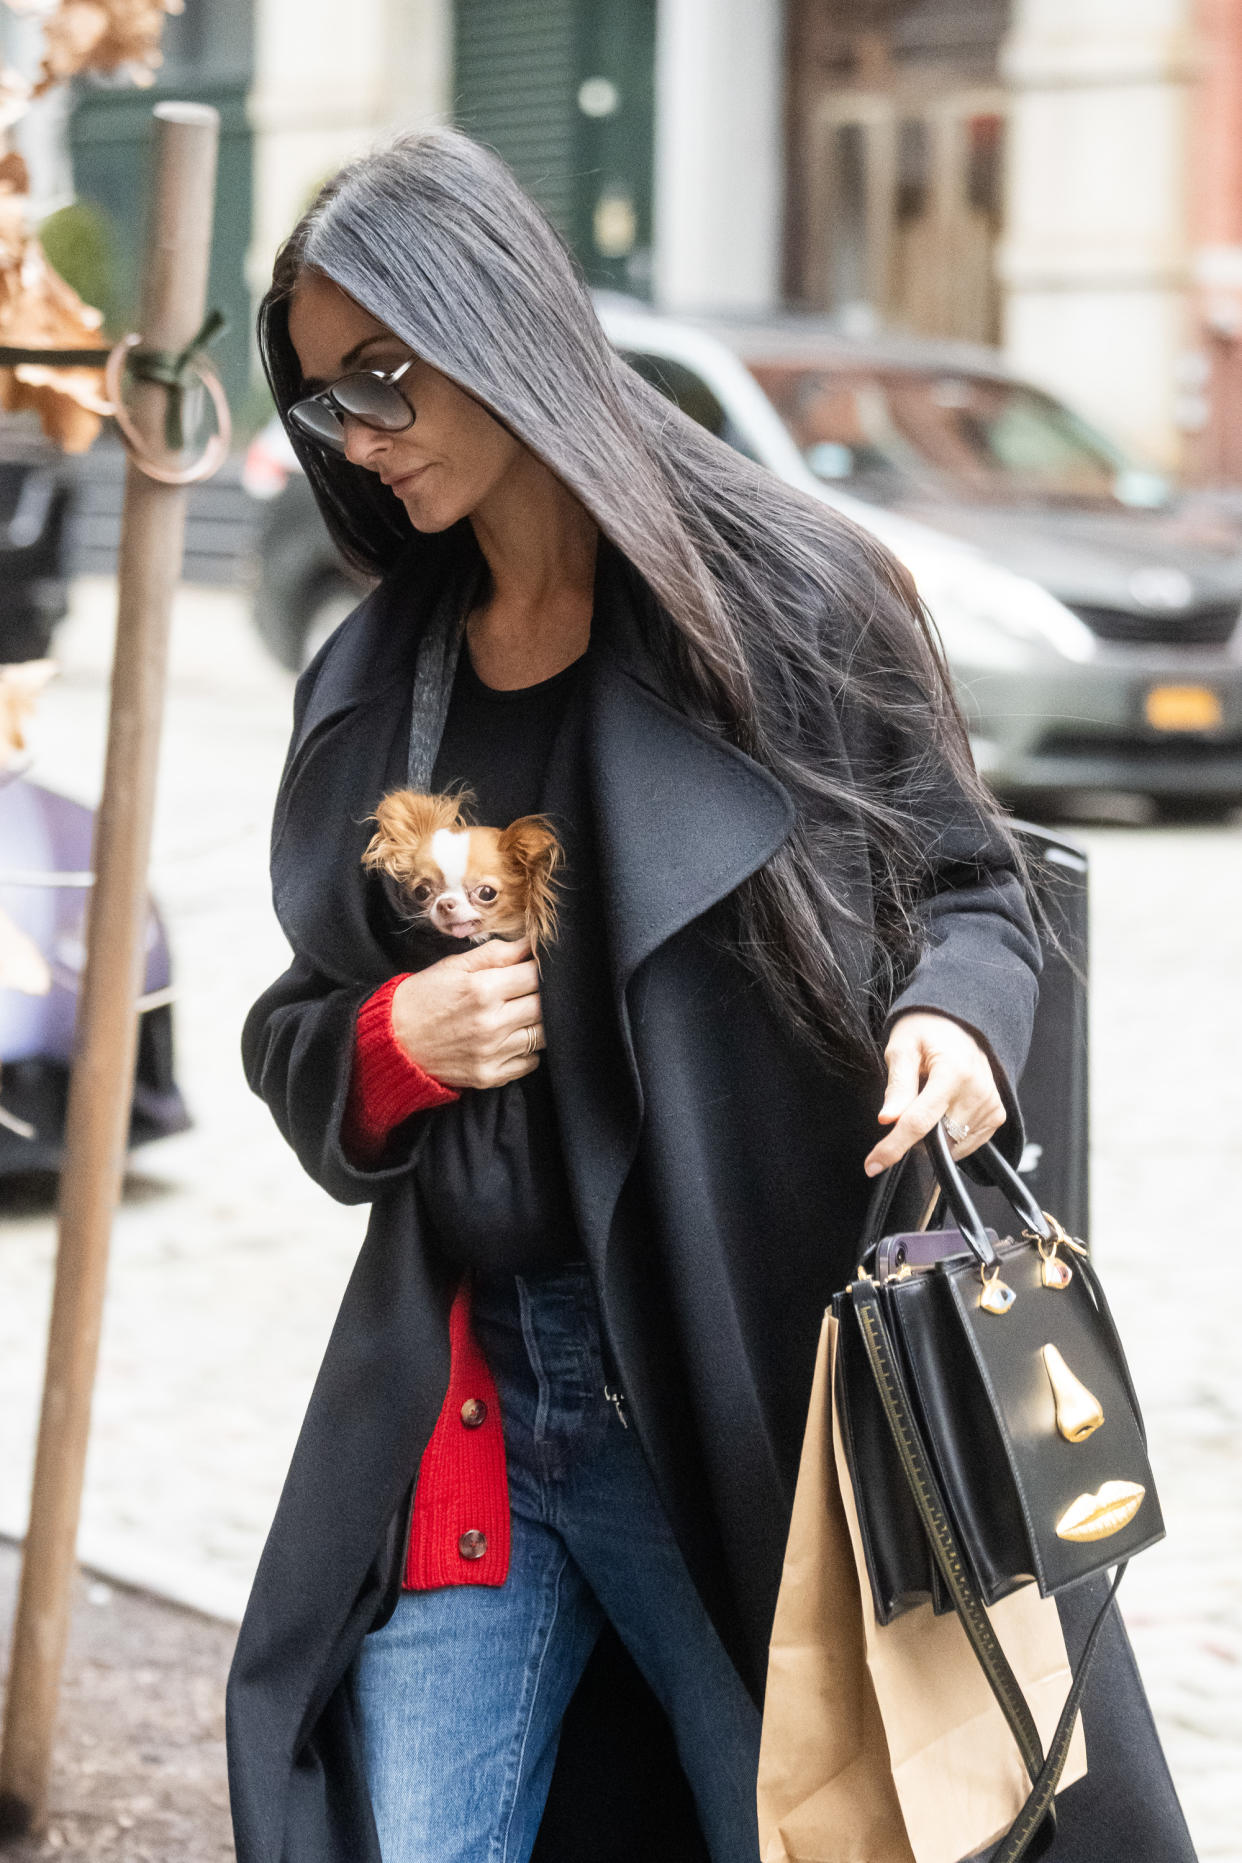 Moore carries Pilaf in a sling under her jacket as she walks in New York City.